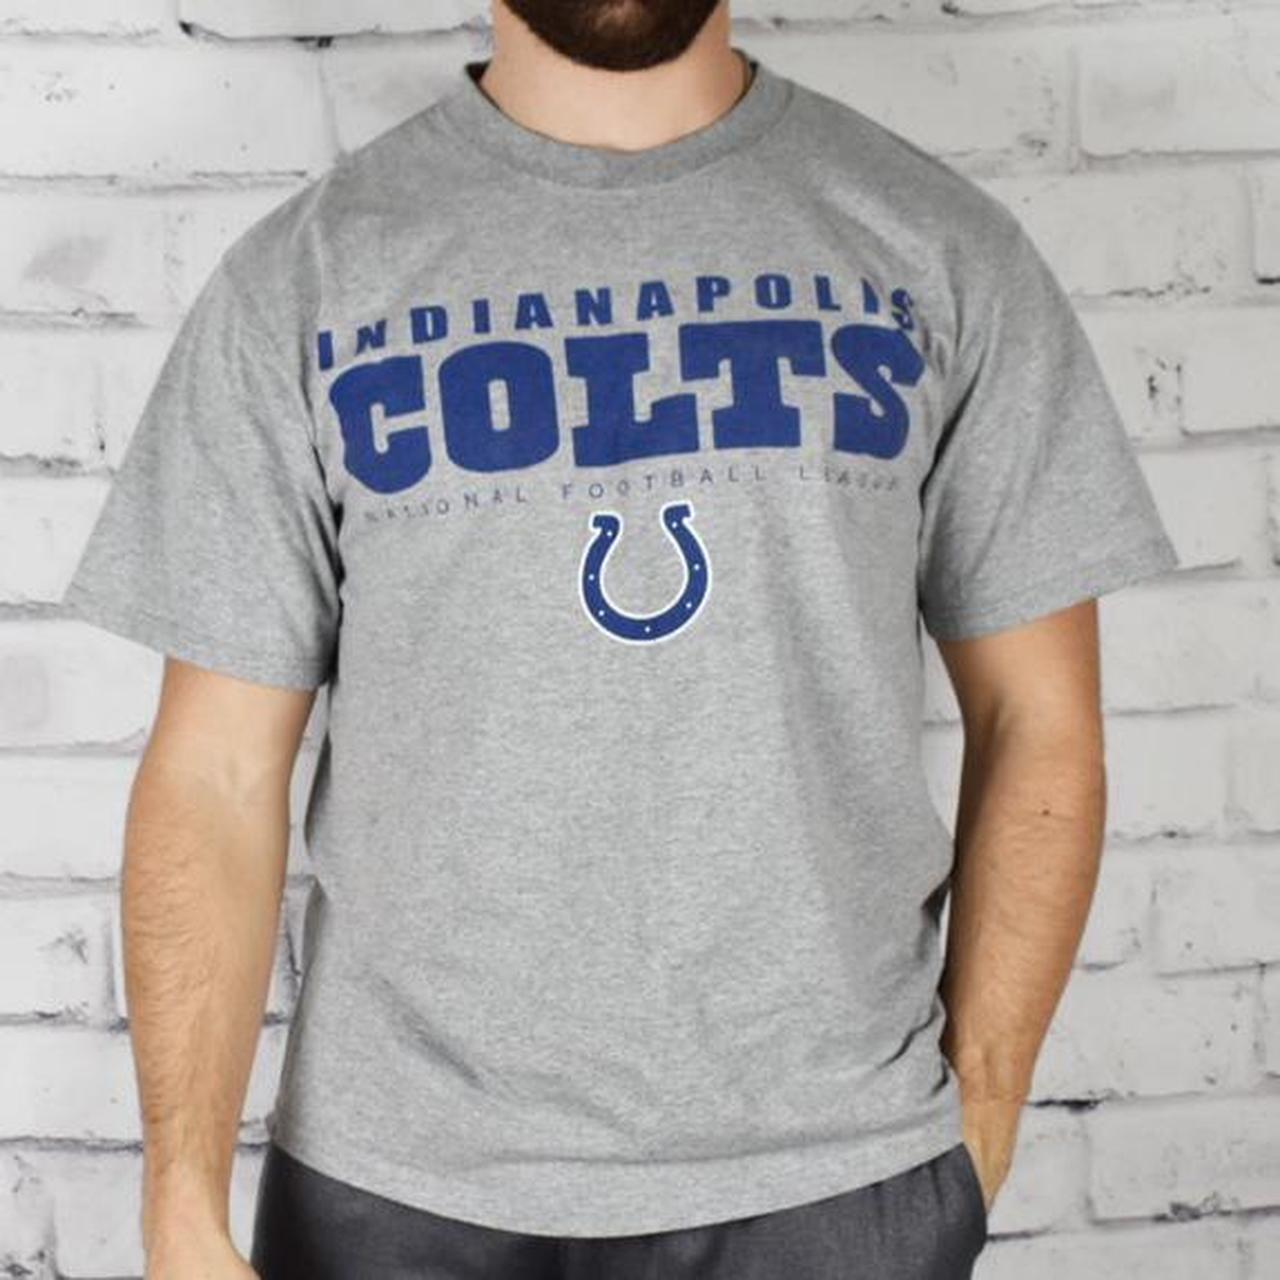 NFL Team Apparel Indianapolis Colts Graphic - Depop